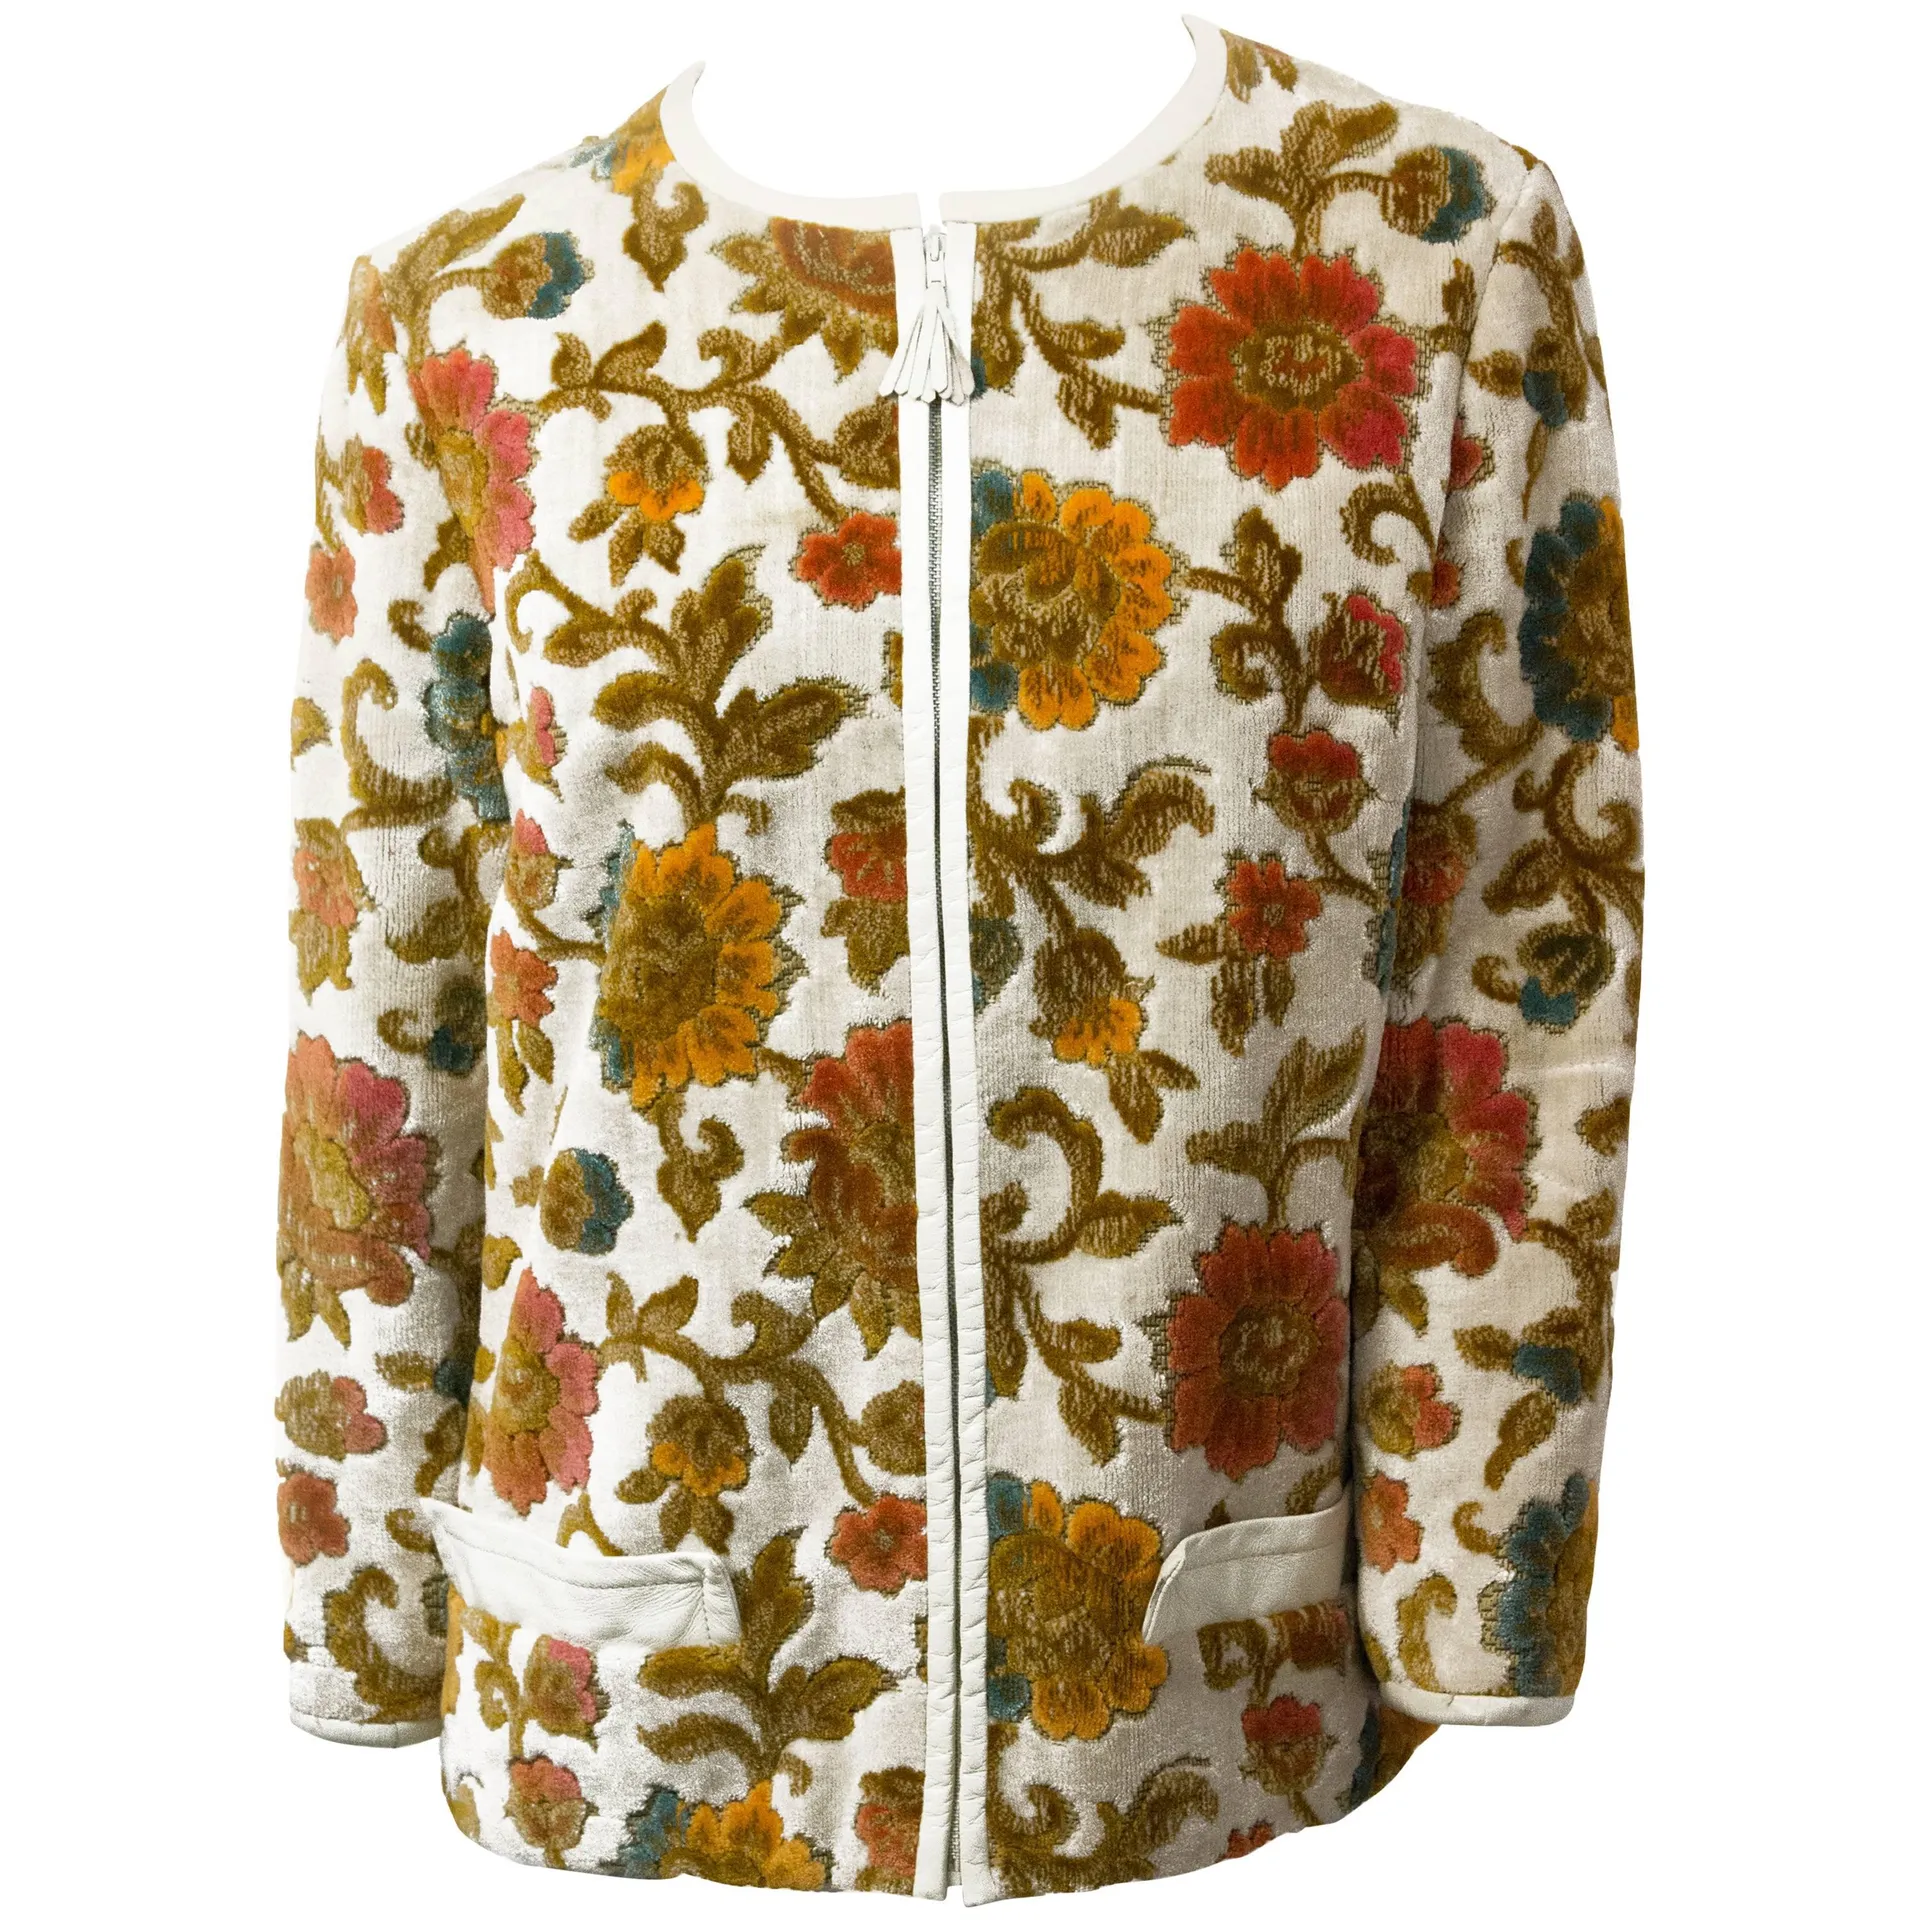 60s Floral Tapestry Jacket with White Leather Trim